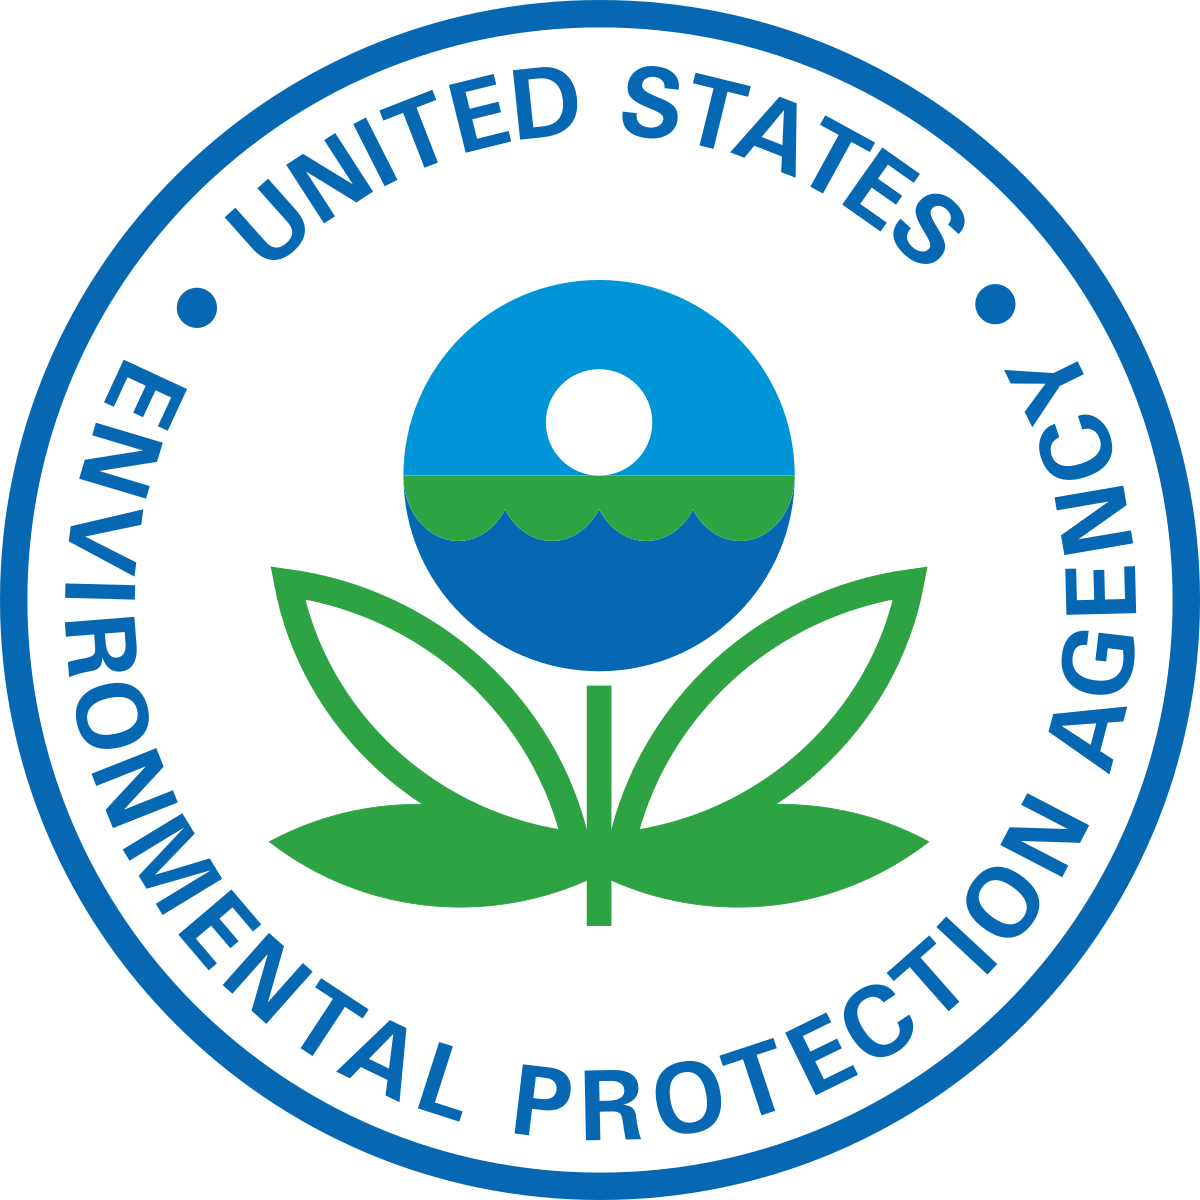 United States Environmental Protection Agency - Wikipedia